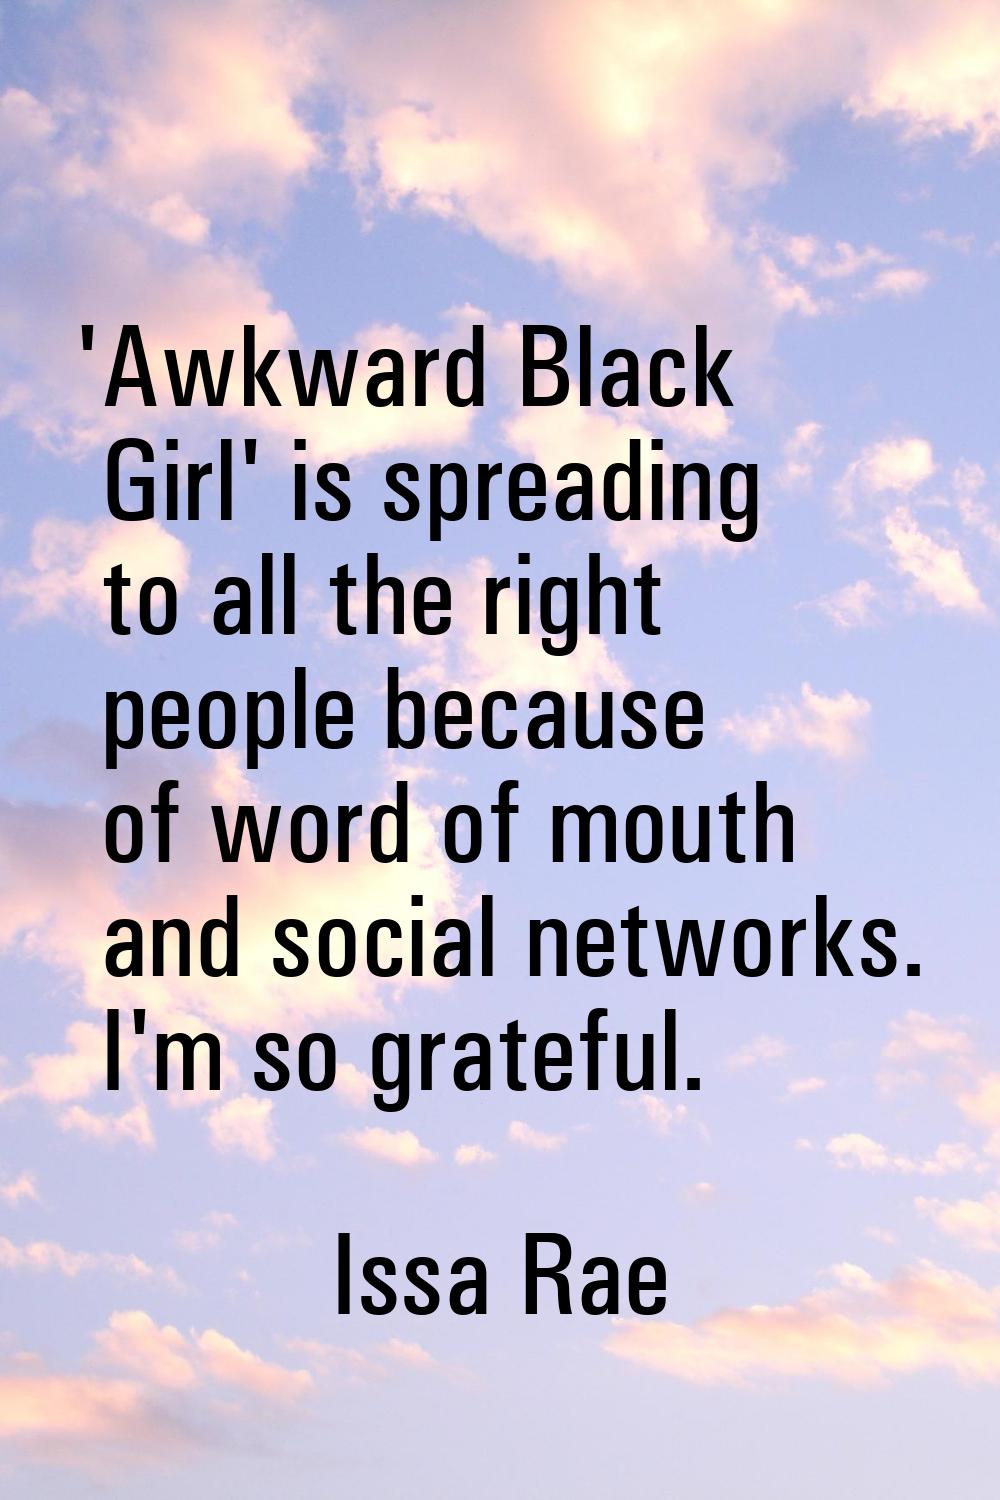 'Awkward Black Girl' is spreading to all the right people because of word of mouth and social netwo